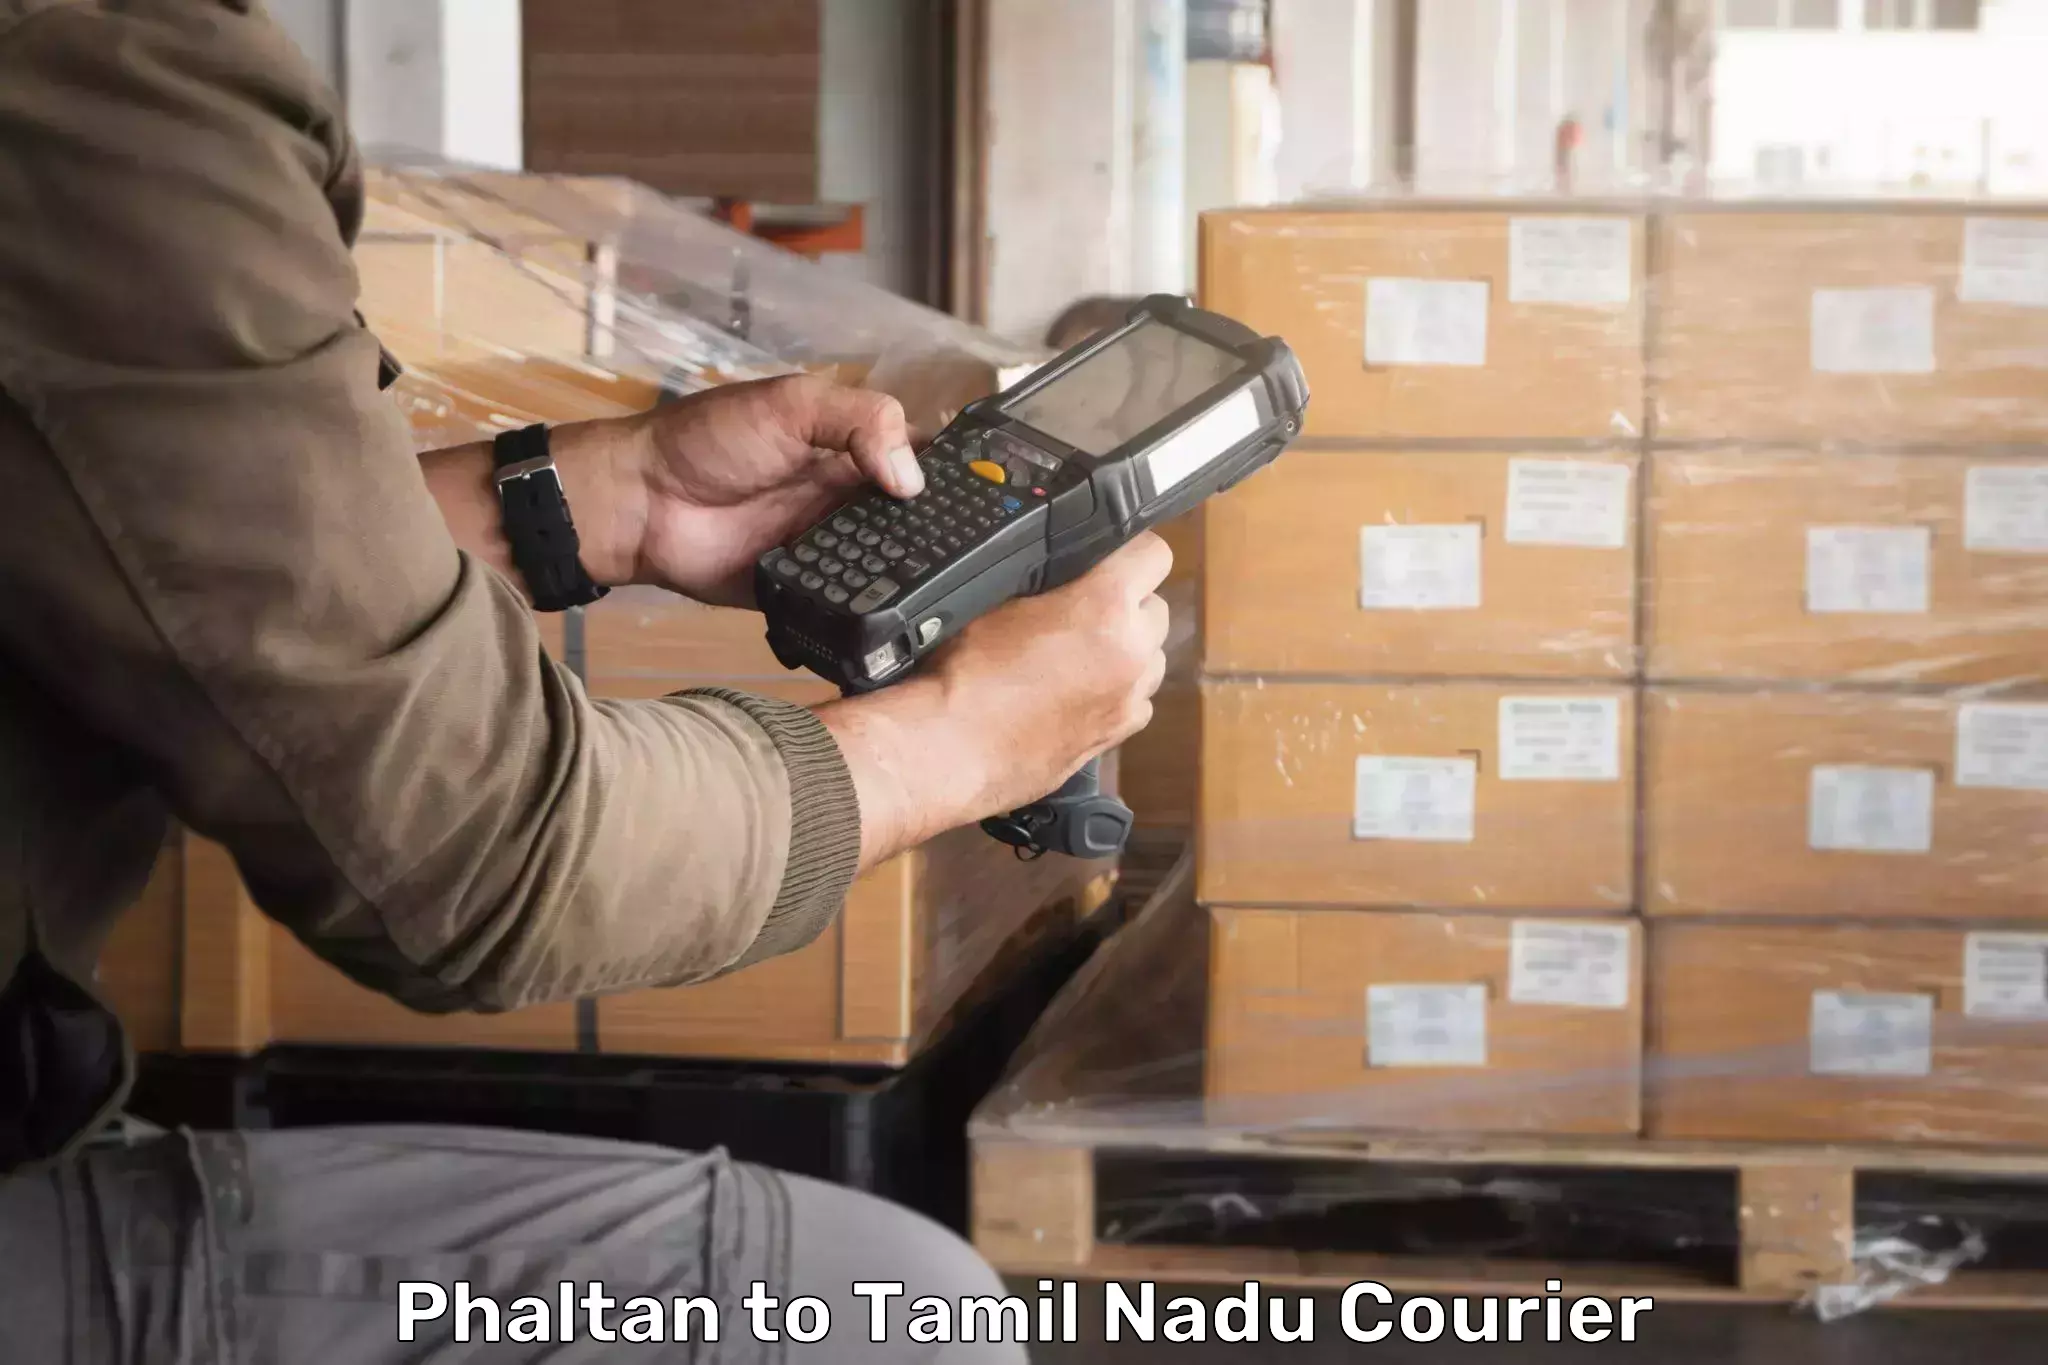 Advanced delivery network Phaltan to Theni